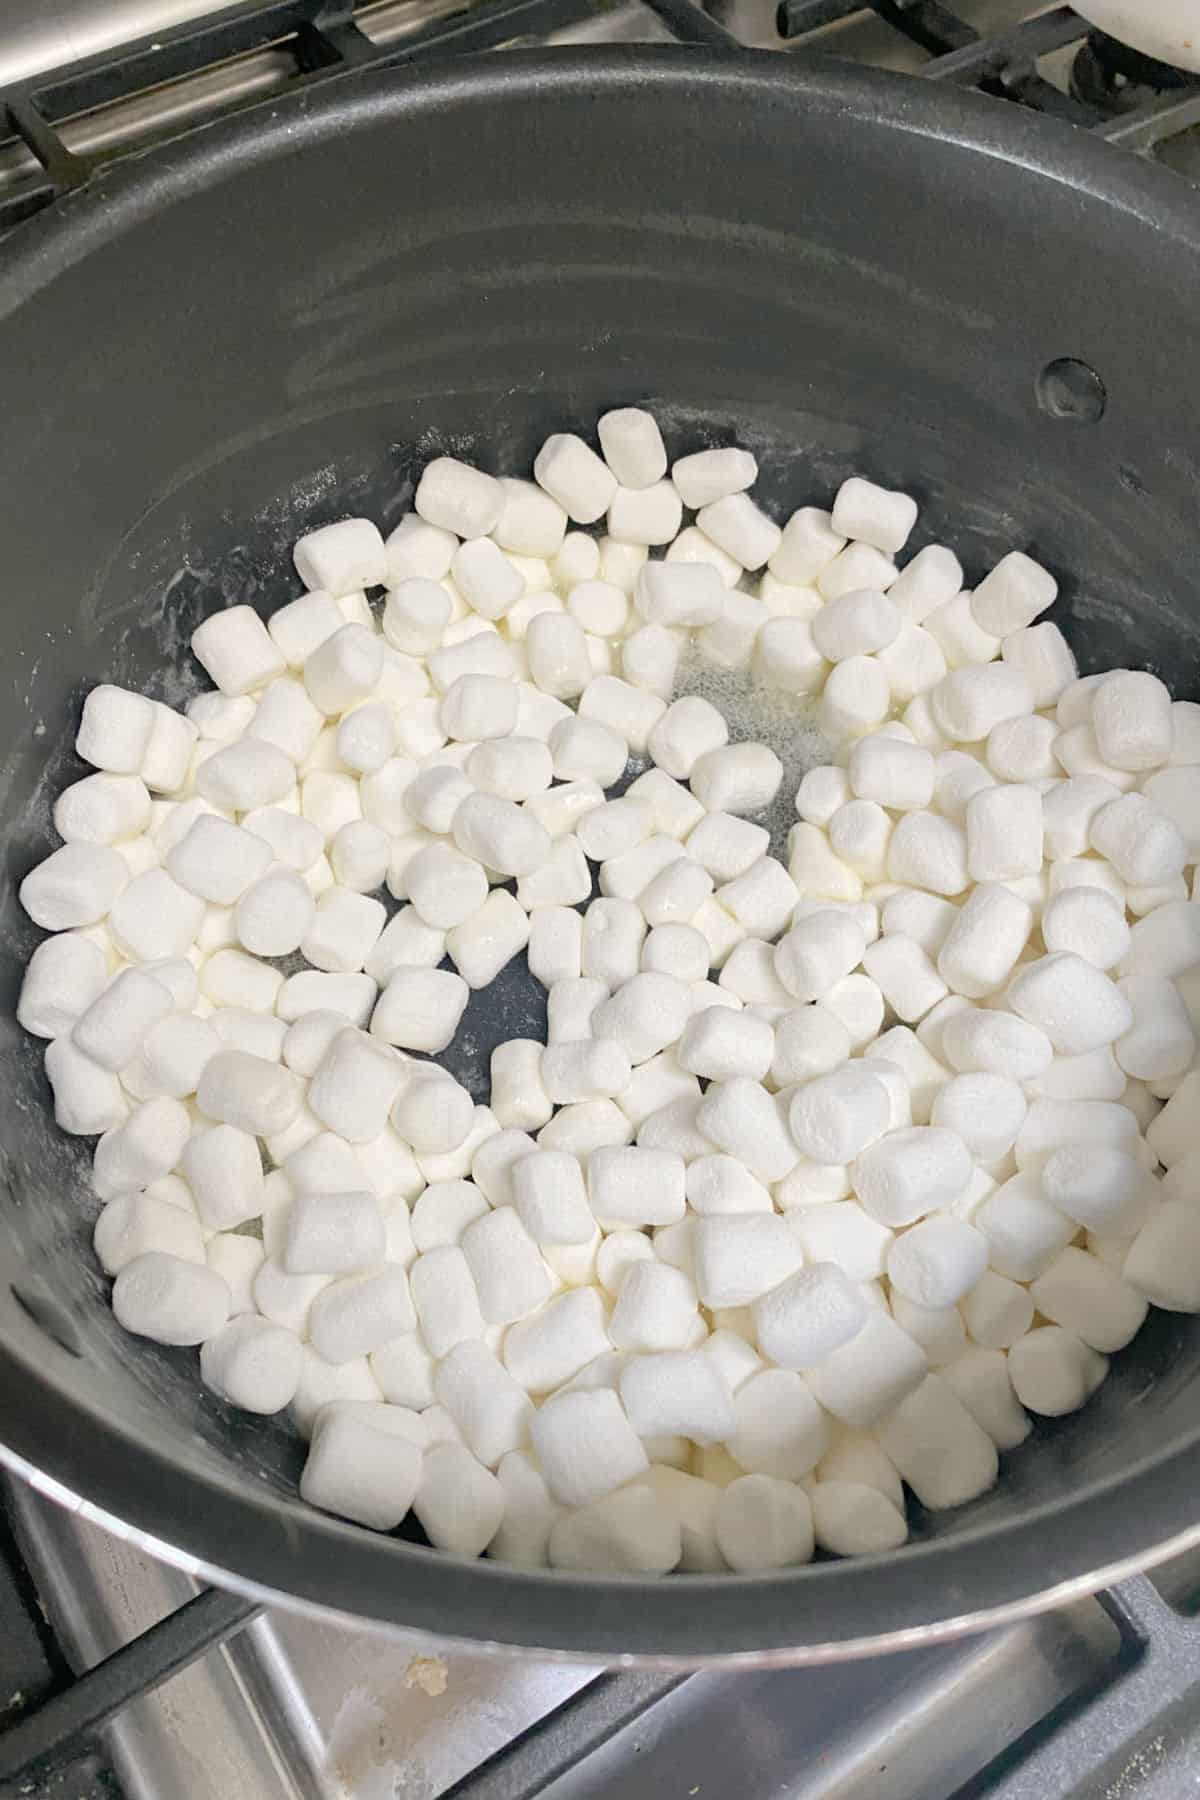 How to Make Strawberry Rice Krispie Treats - step one melting marshmallows.